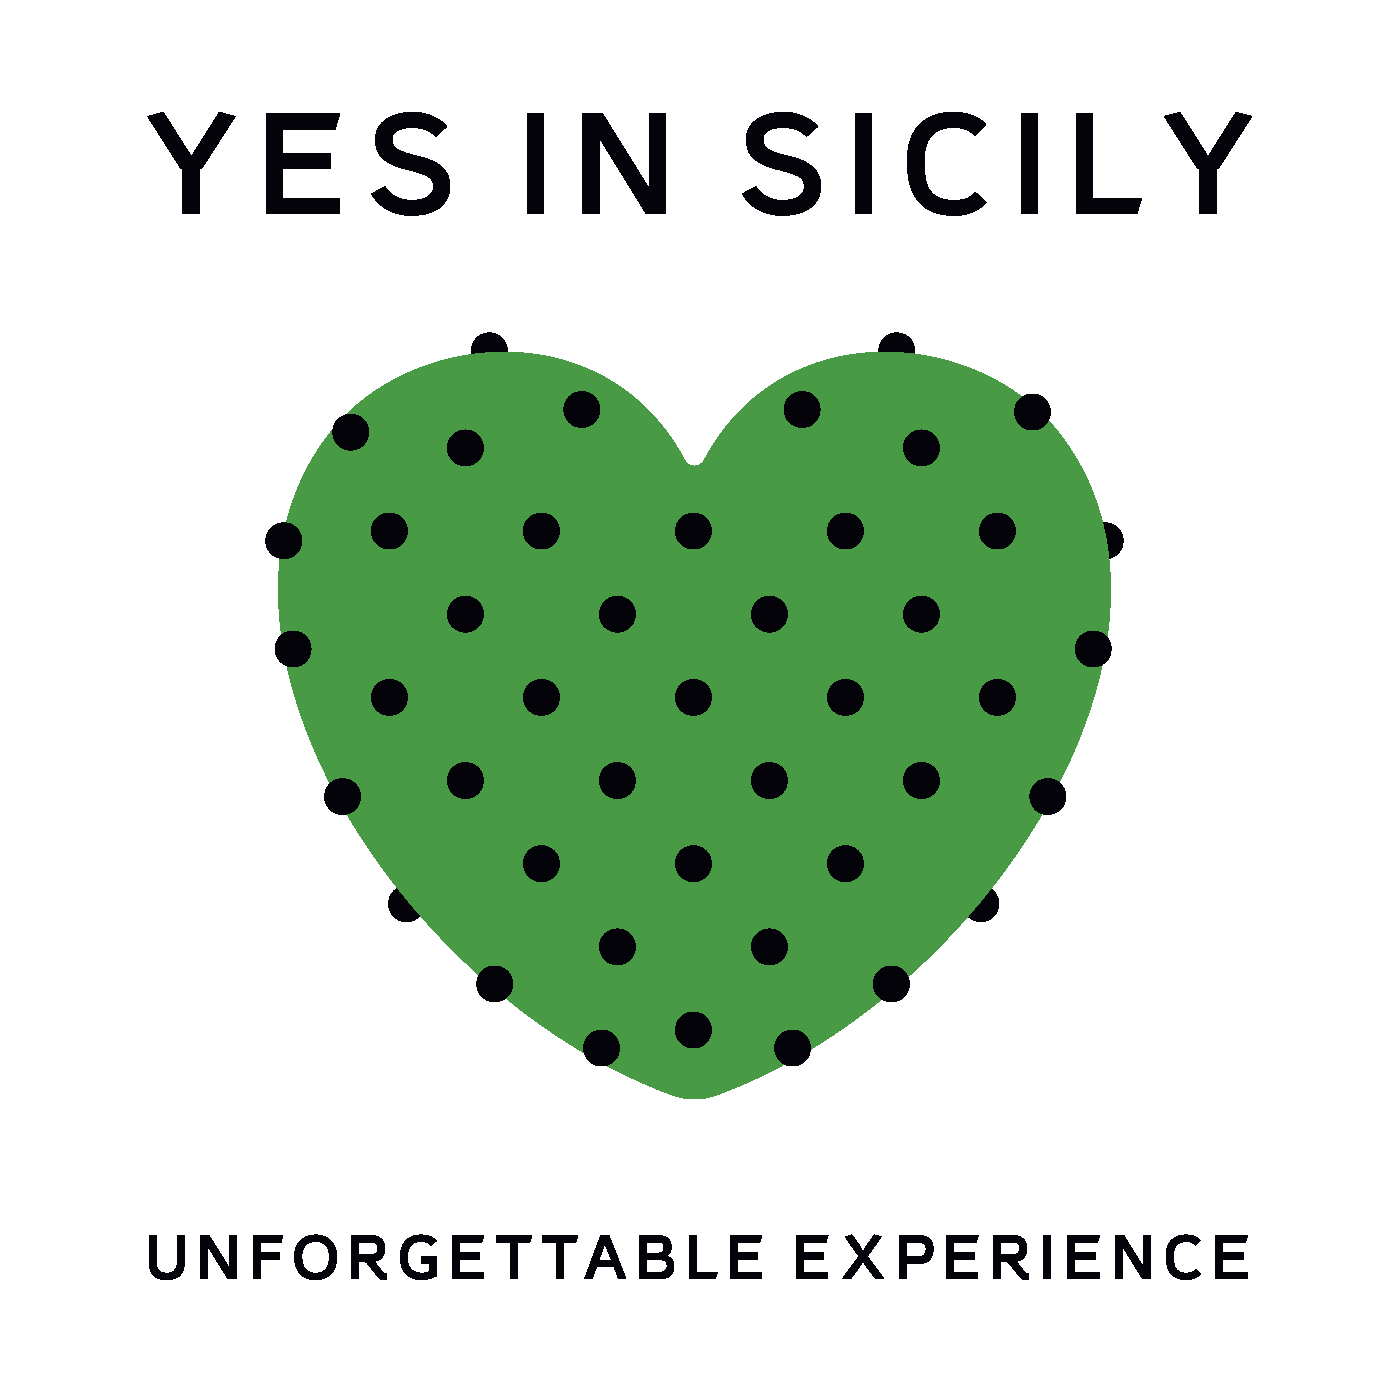 Yes in Sicily